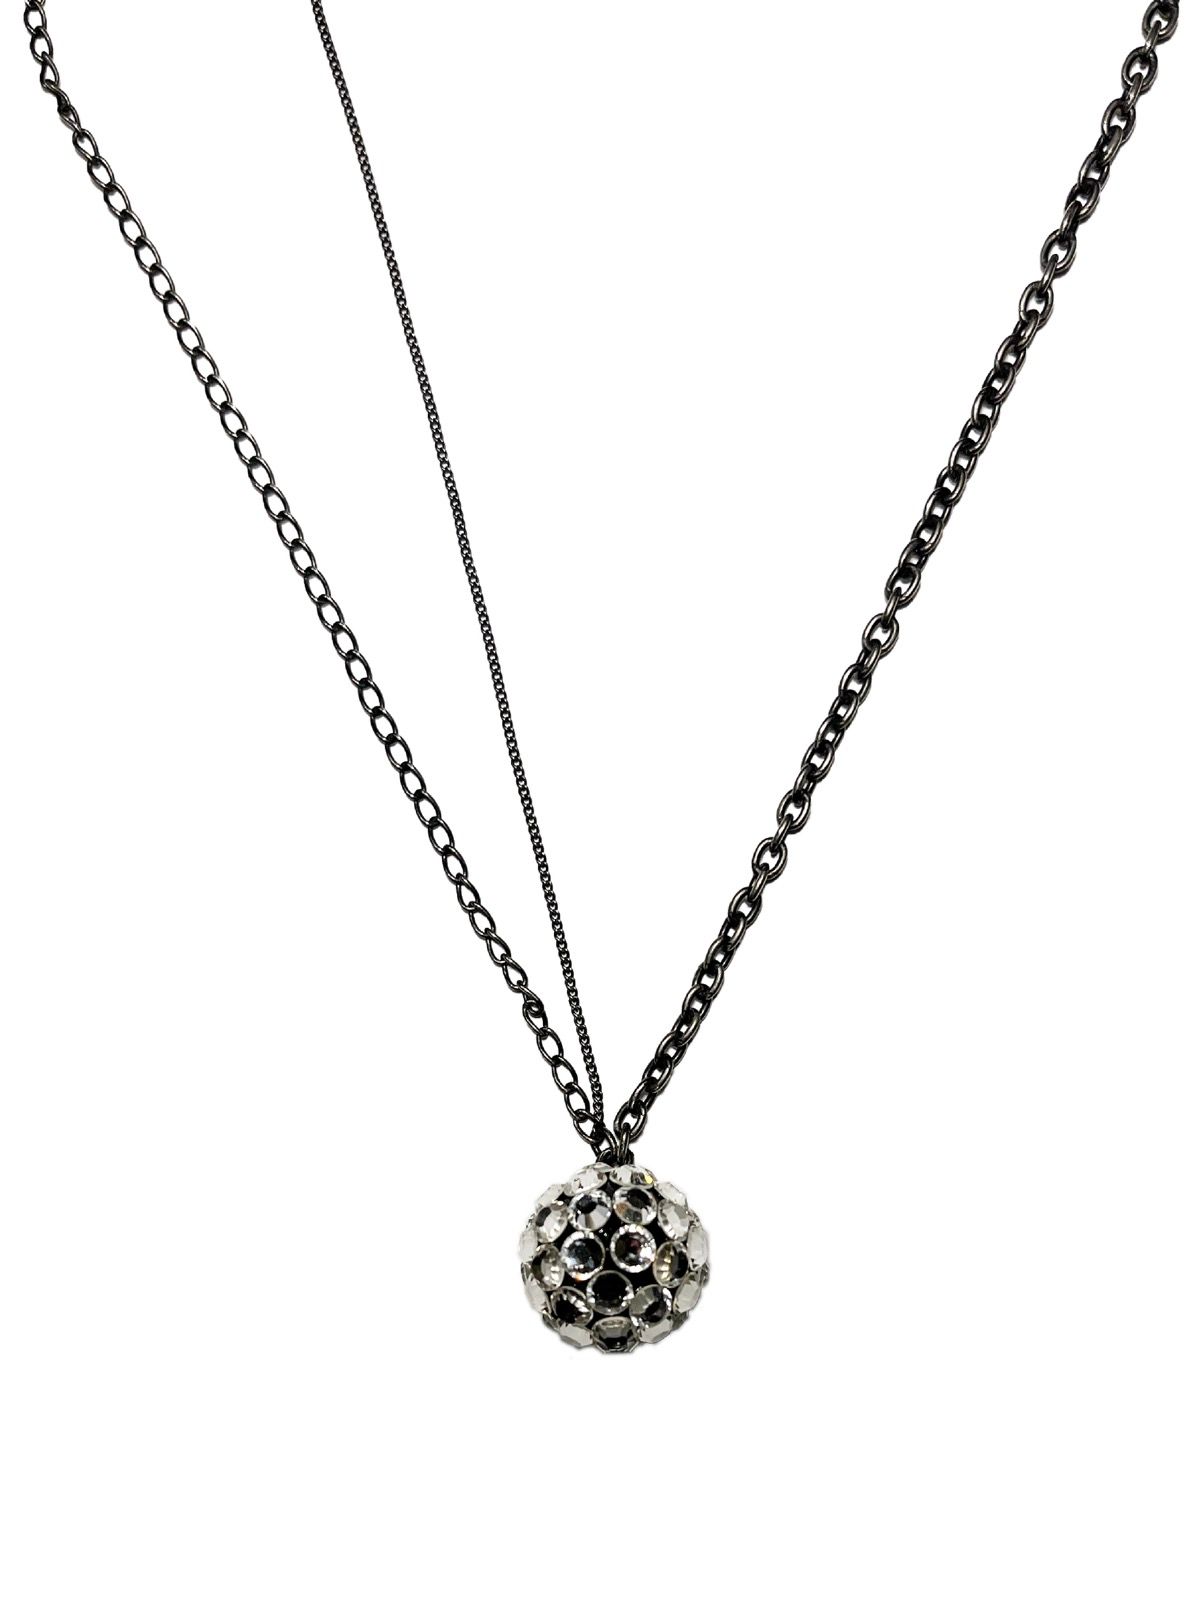 Pre-owned Jun Takahashi X Undercover Silver Crystal Disco Ball Chain Necklace